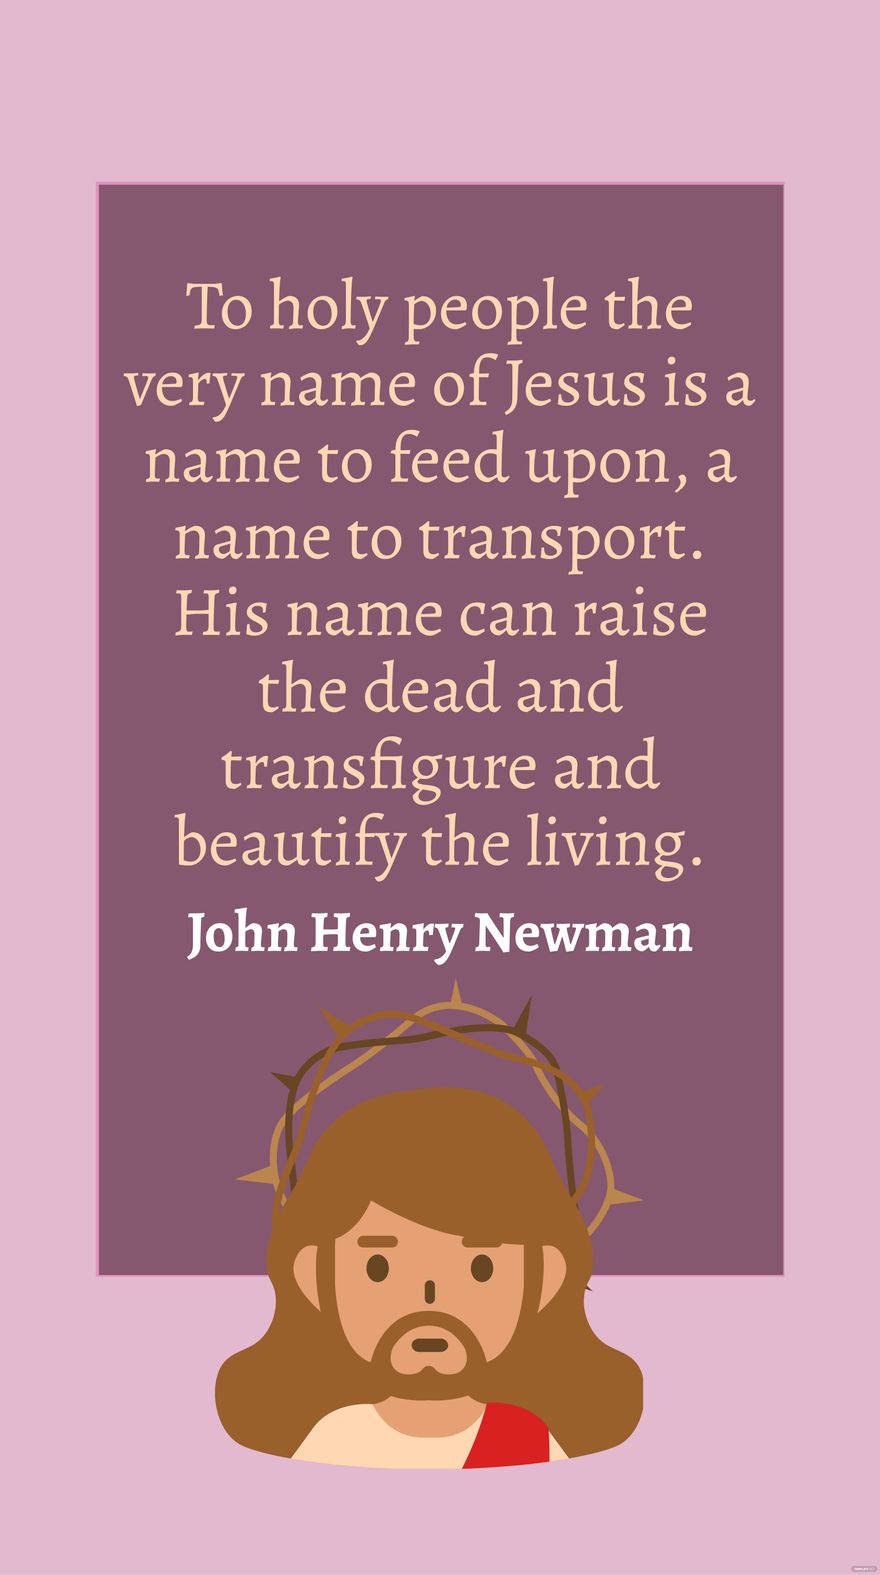 Free John Henry Newman - To holy people the very name of Jesus is a name to feed upon, a name to transport. His name can raise the dead and transfigure and beautify the living. in JPG